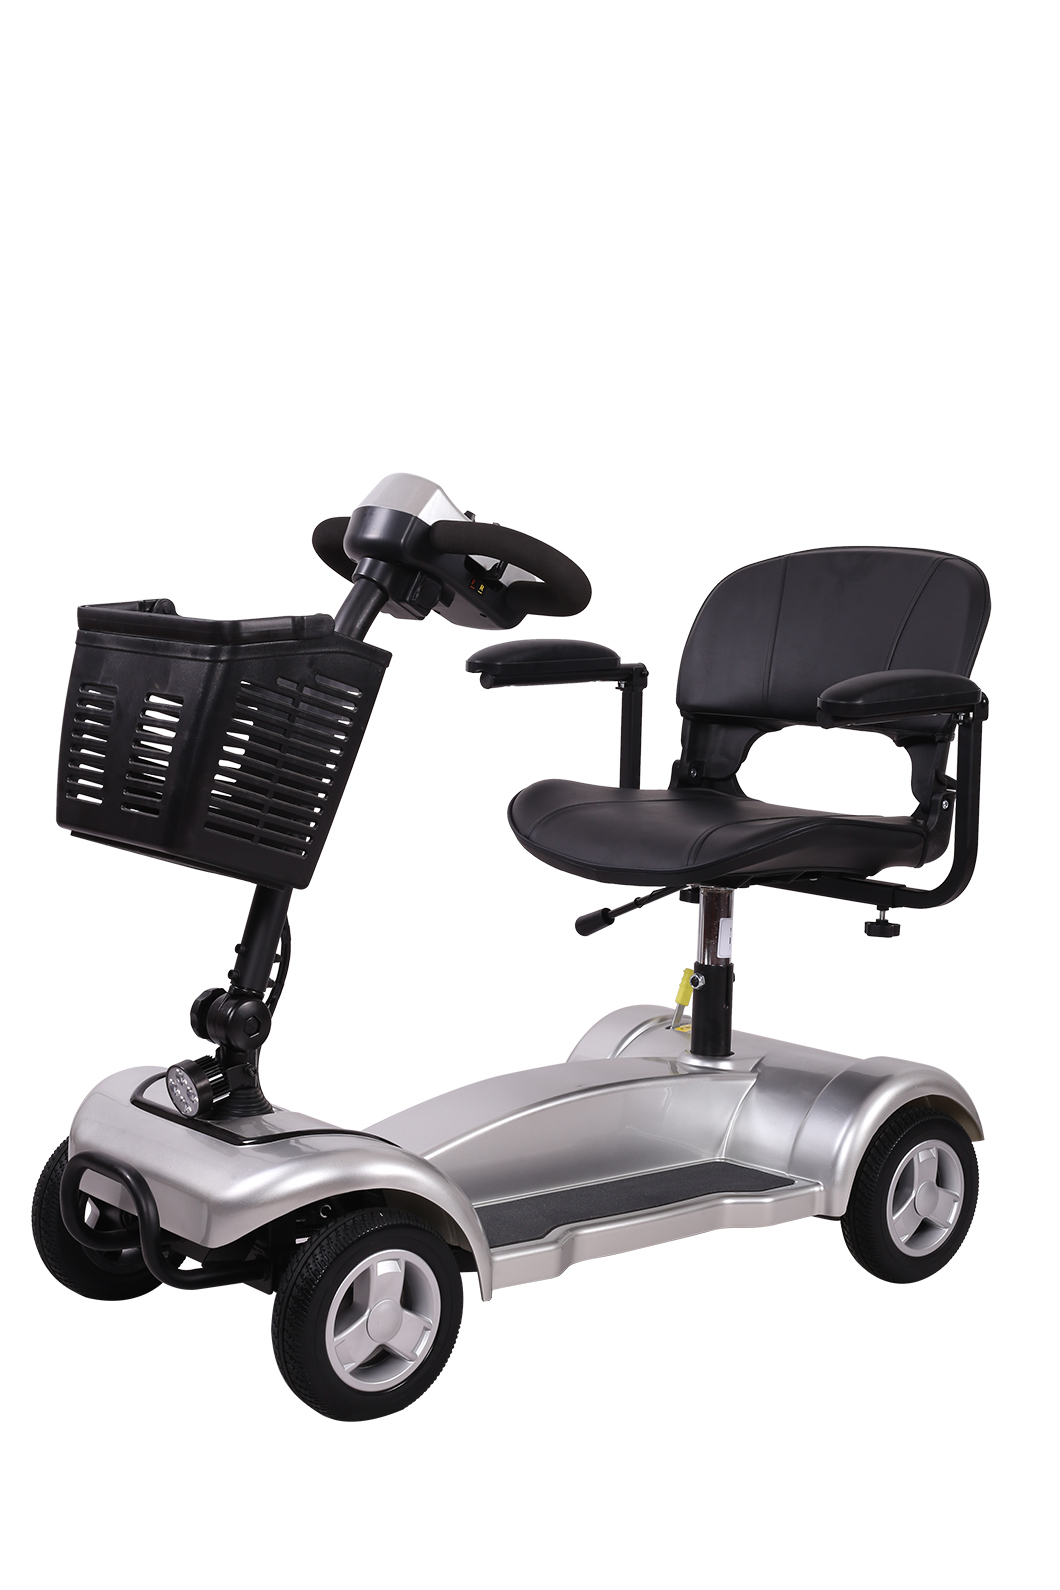 12V / 180W ELDERLY DISABILITY ELECTRIC MOBILITY SCOOTER IN LEAD-ACID BATTERY VERSION (X-01)